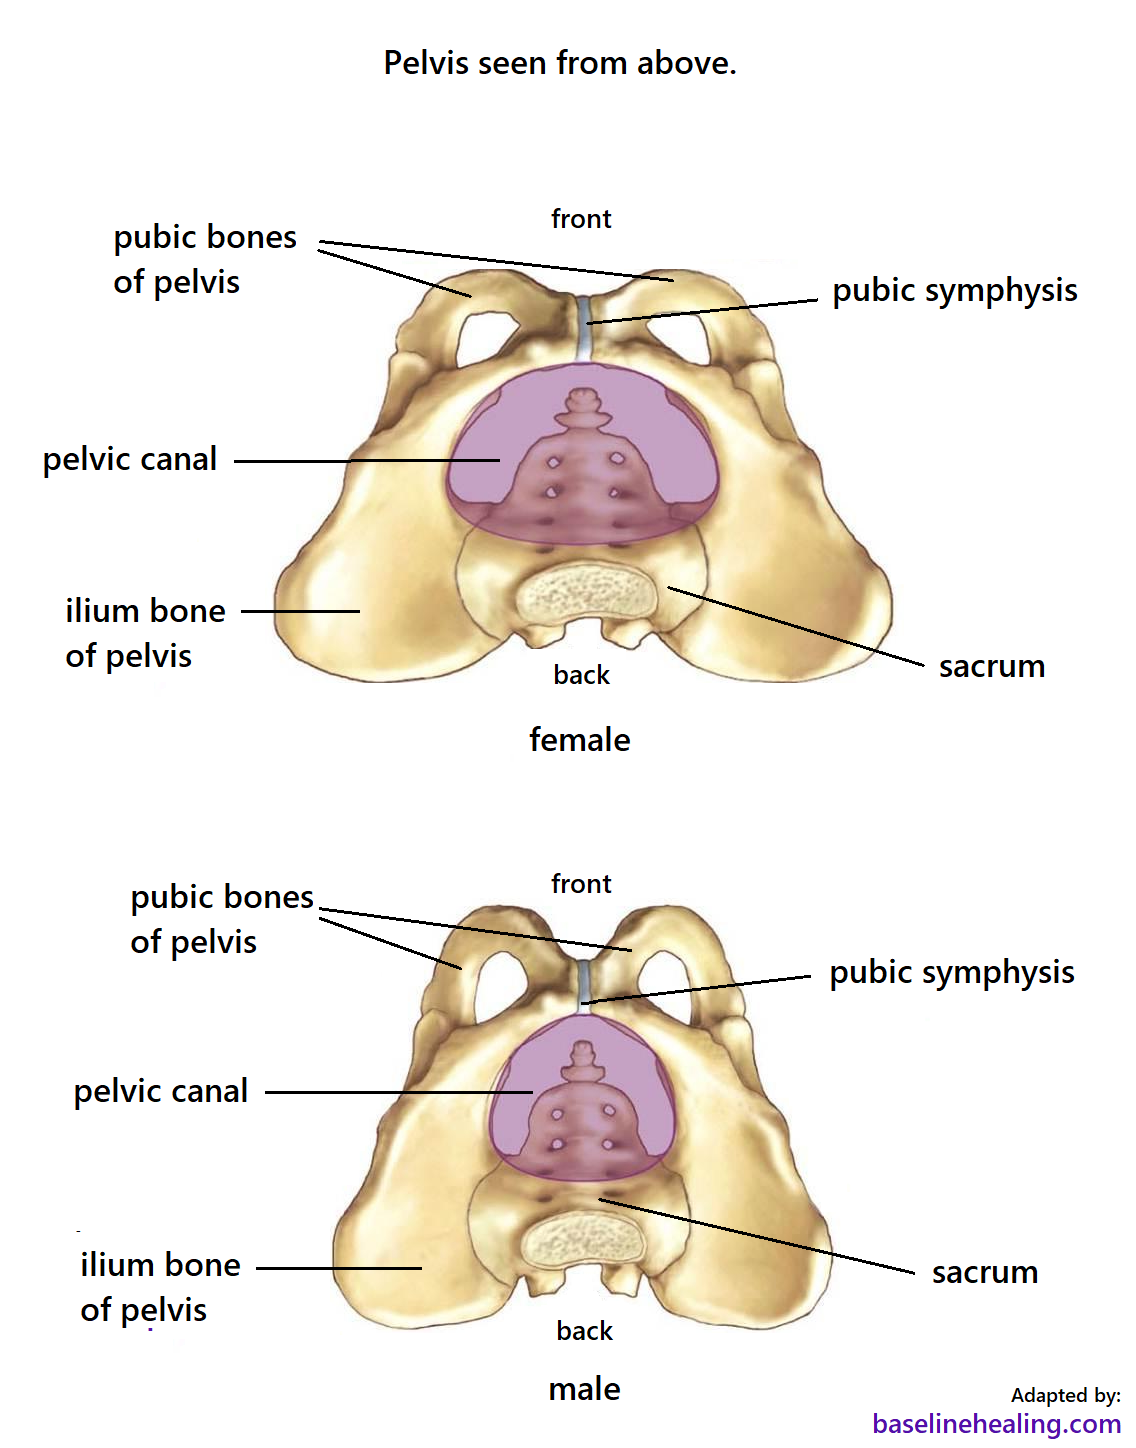 The pelvis and pelvic canal seen from above. Two images showing the difference in the shape between the male and female pelvis. The ilium bone of the female pelvis has wider wings whereas the male pelvis is narrower. The pelvic canal of a female pelvis is an oval shape, larger and wider than the male pelvic canal, a smaller, rounder hole.